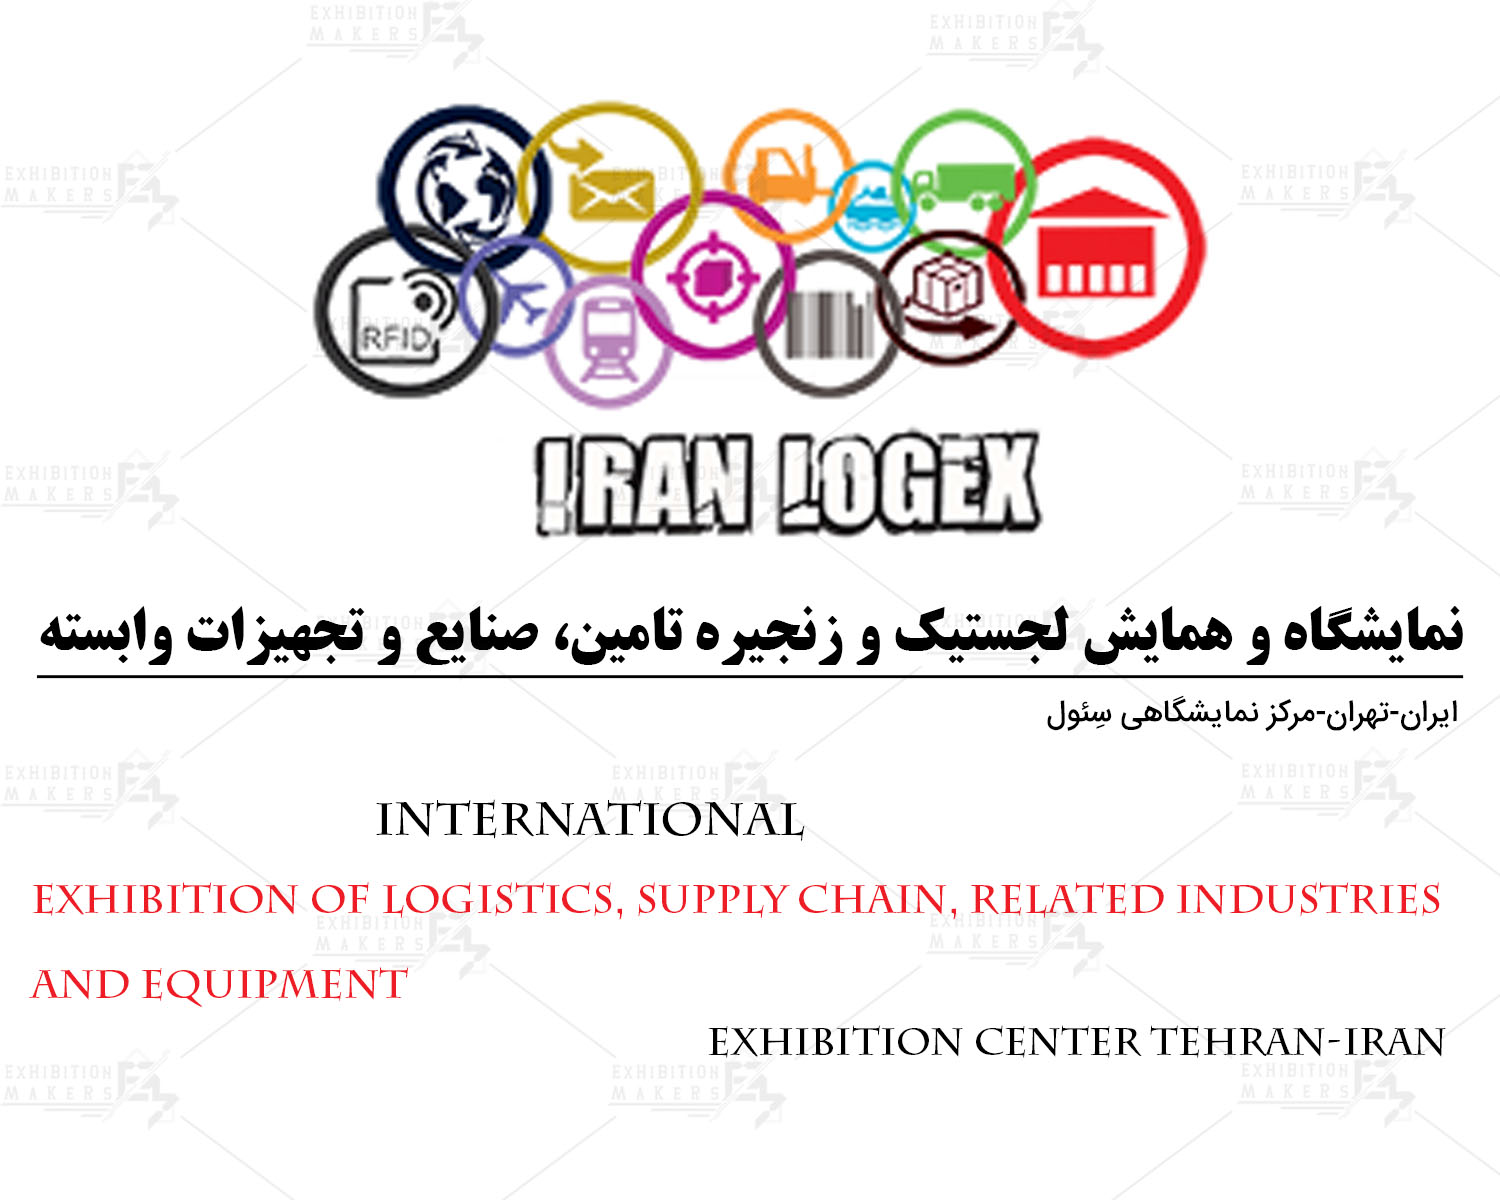 Tehran International Exhibition of Logistics, supply chain, related industries and equipment